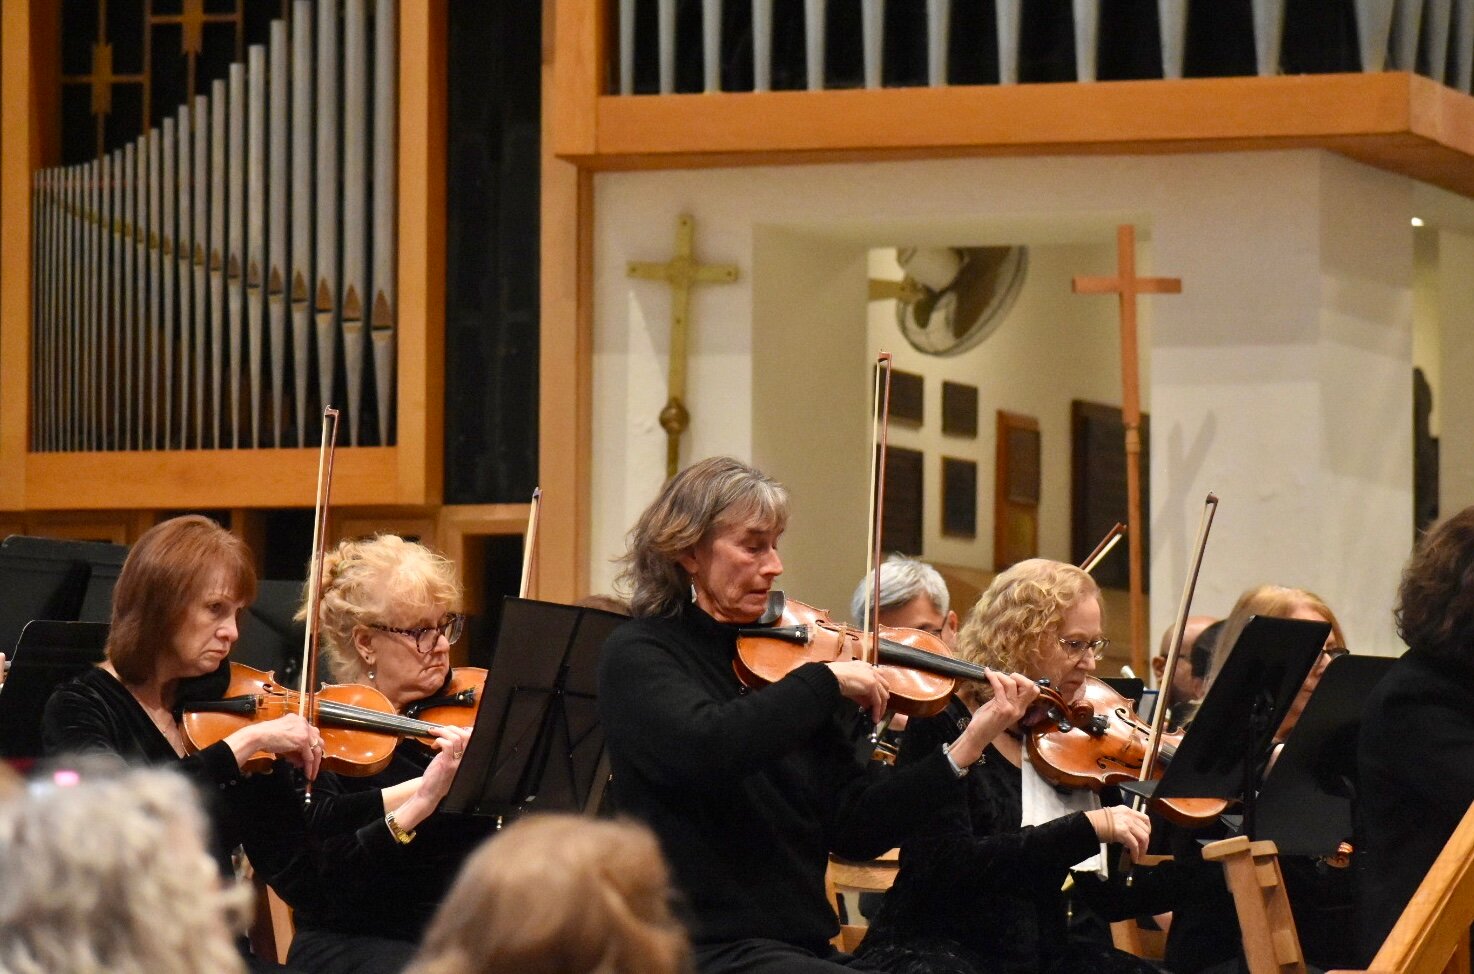 The Island Symphony Orchestra is an accomplished nonprofit orchestra consisting of 60 talented musicians.